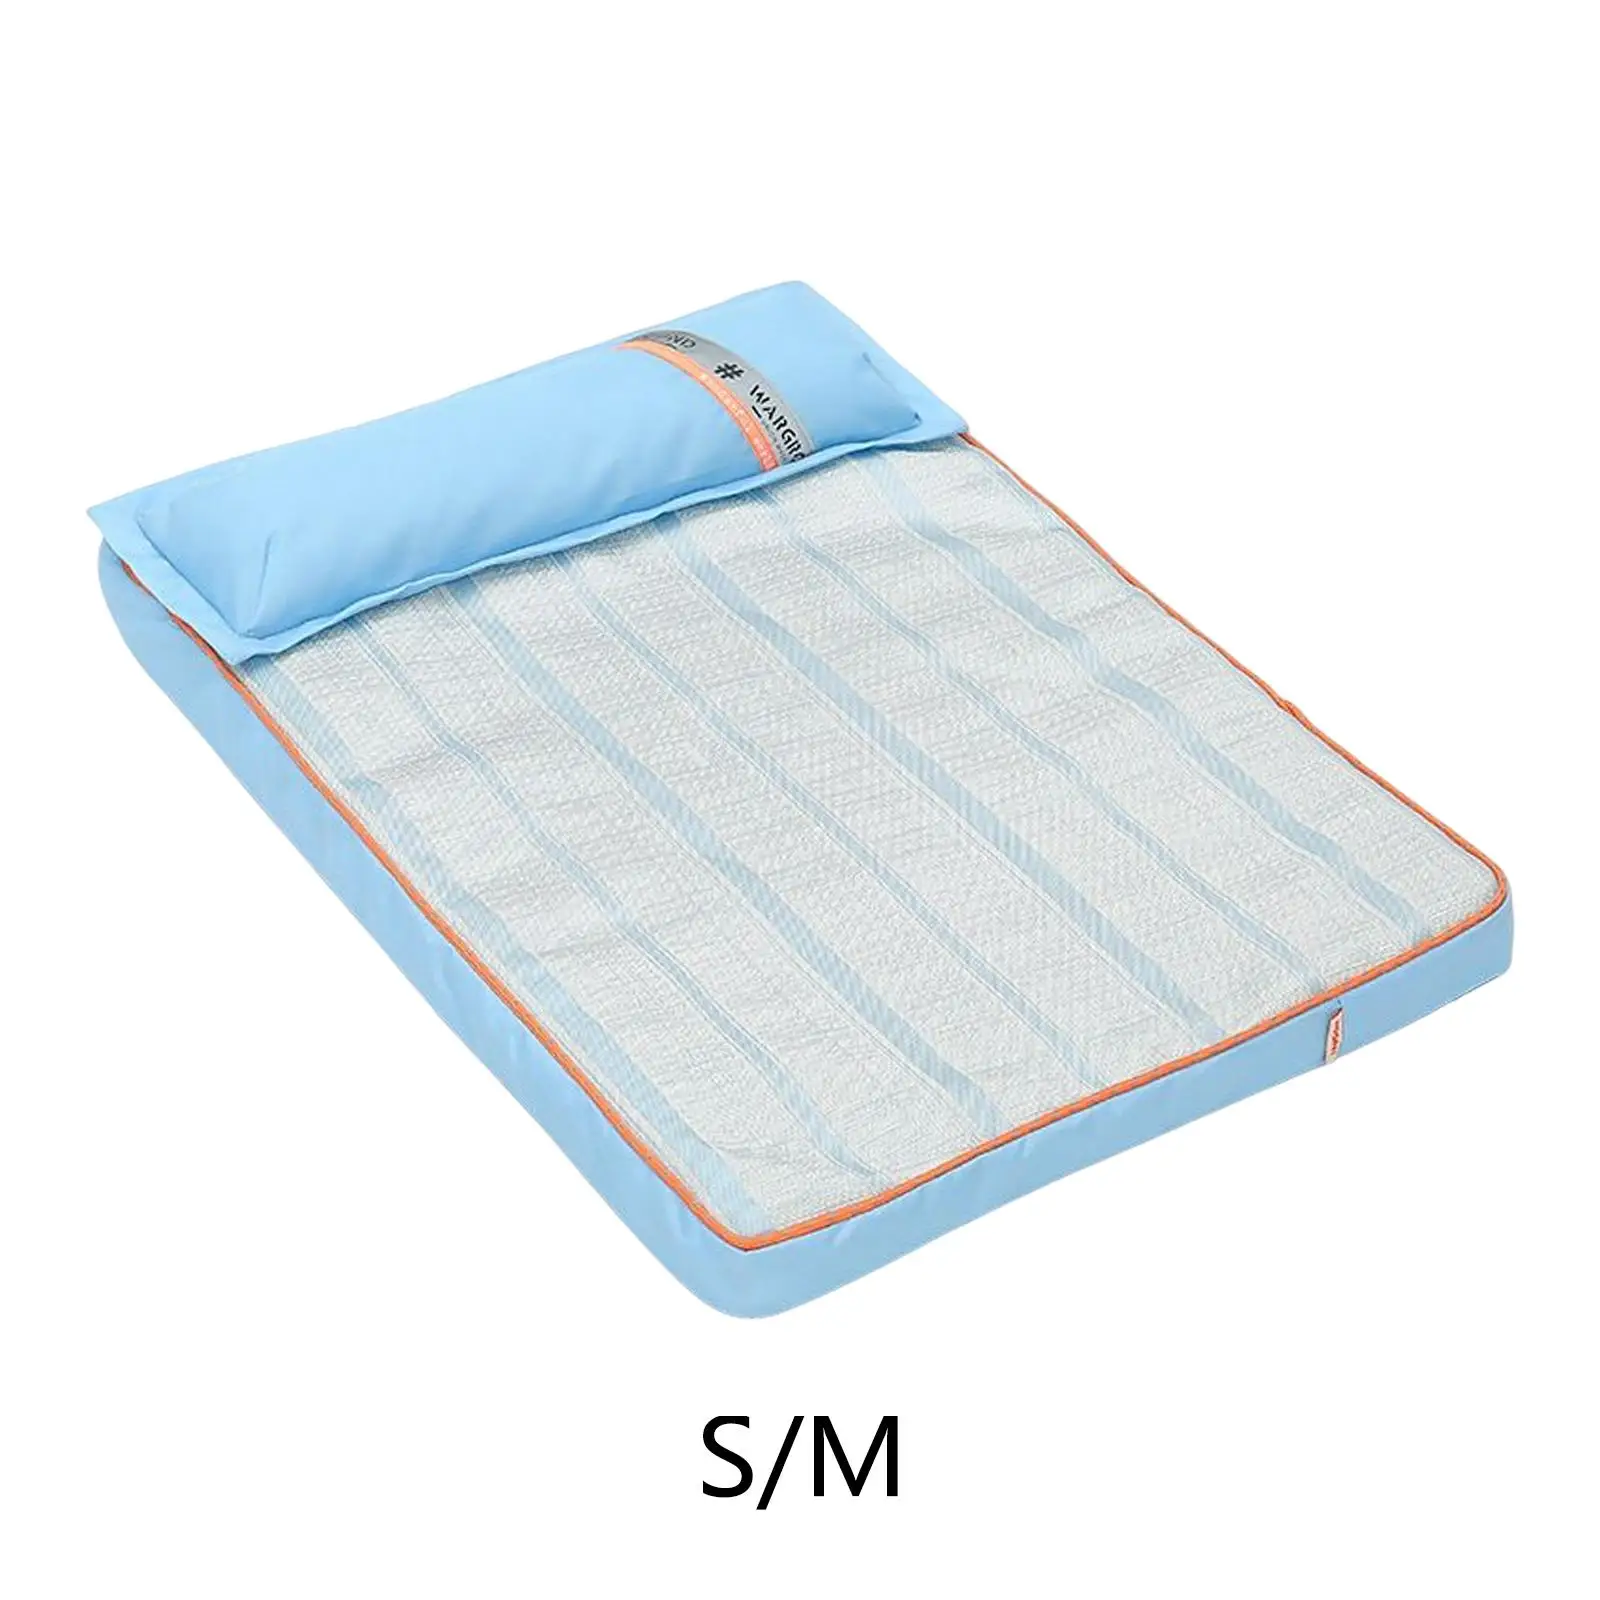 Dog Bed Blanket Sleeping Pad, Dog Sofa Bed with Pillow Comfortable Puppy Bed Mattress Washable Pet Cooling Mat Pet Supplies